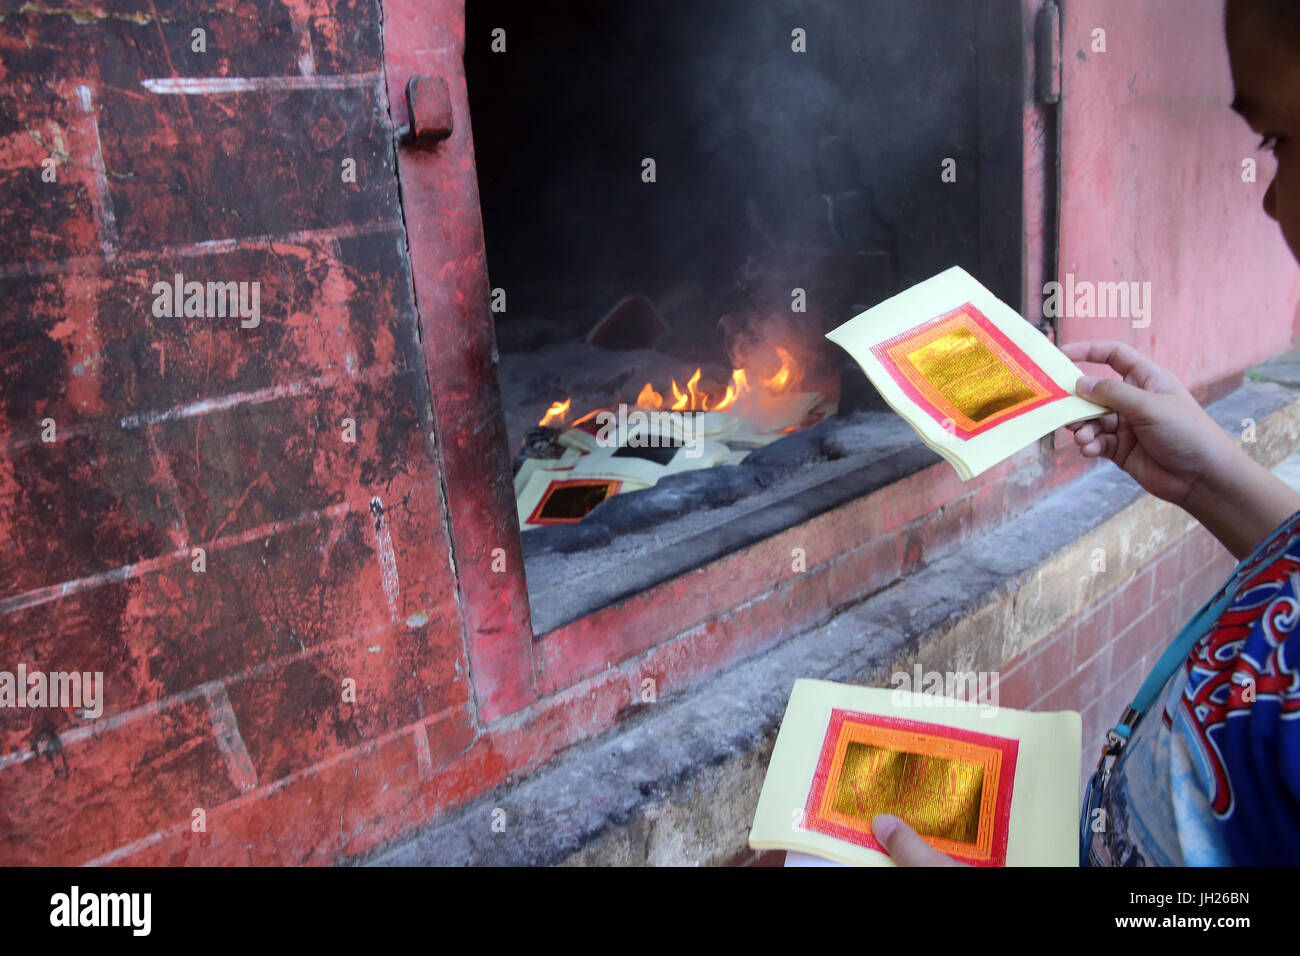 Hungry Ghost Festival (Ullambana). Ancestor worship.  Burning hell bank notes and other forms of joss paper. Lian Shan Shuang Lin Monastery. Singapore Stock Photo